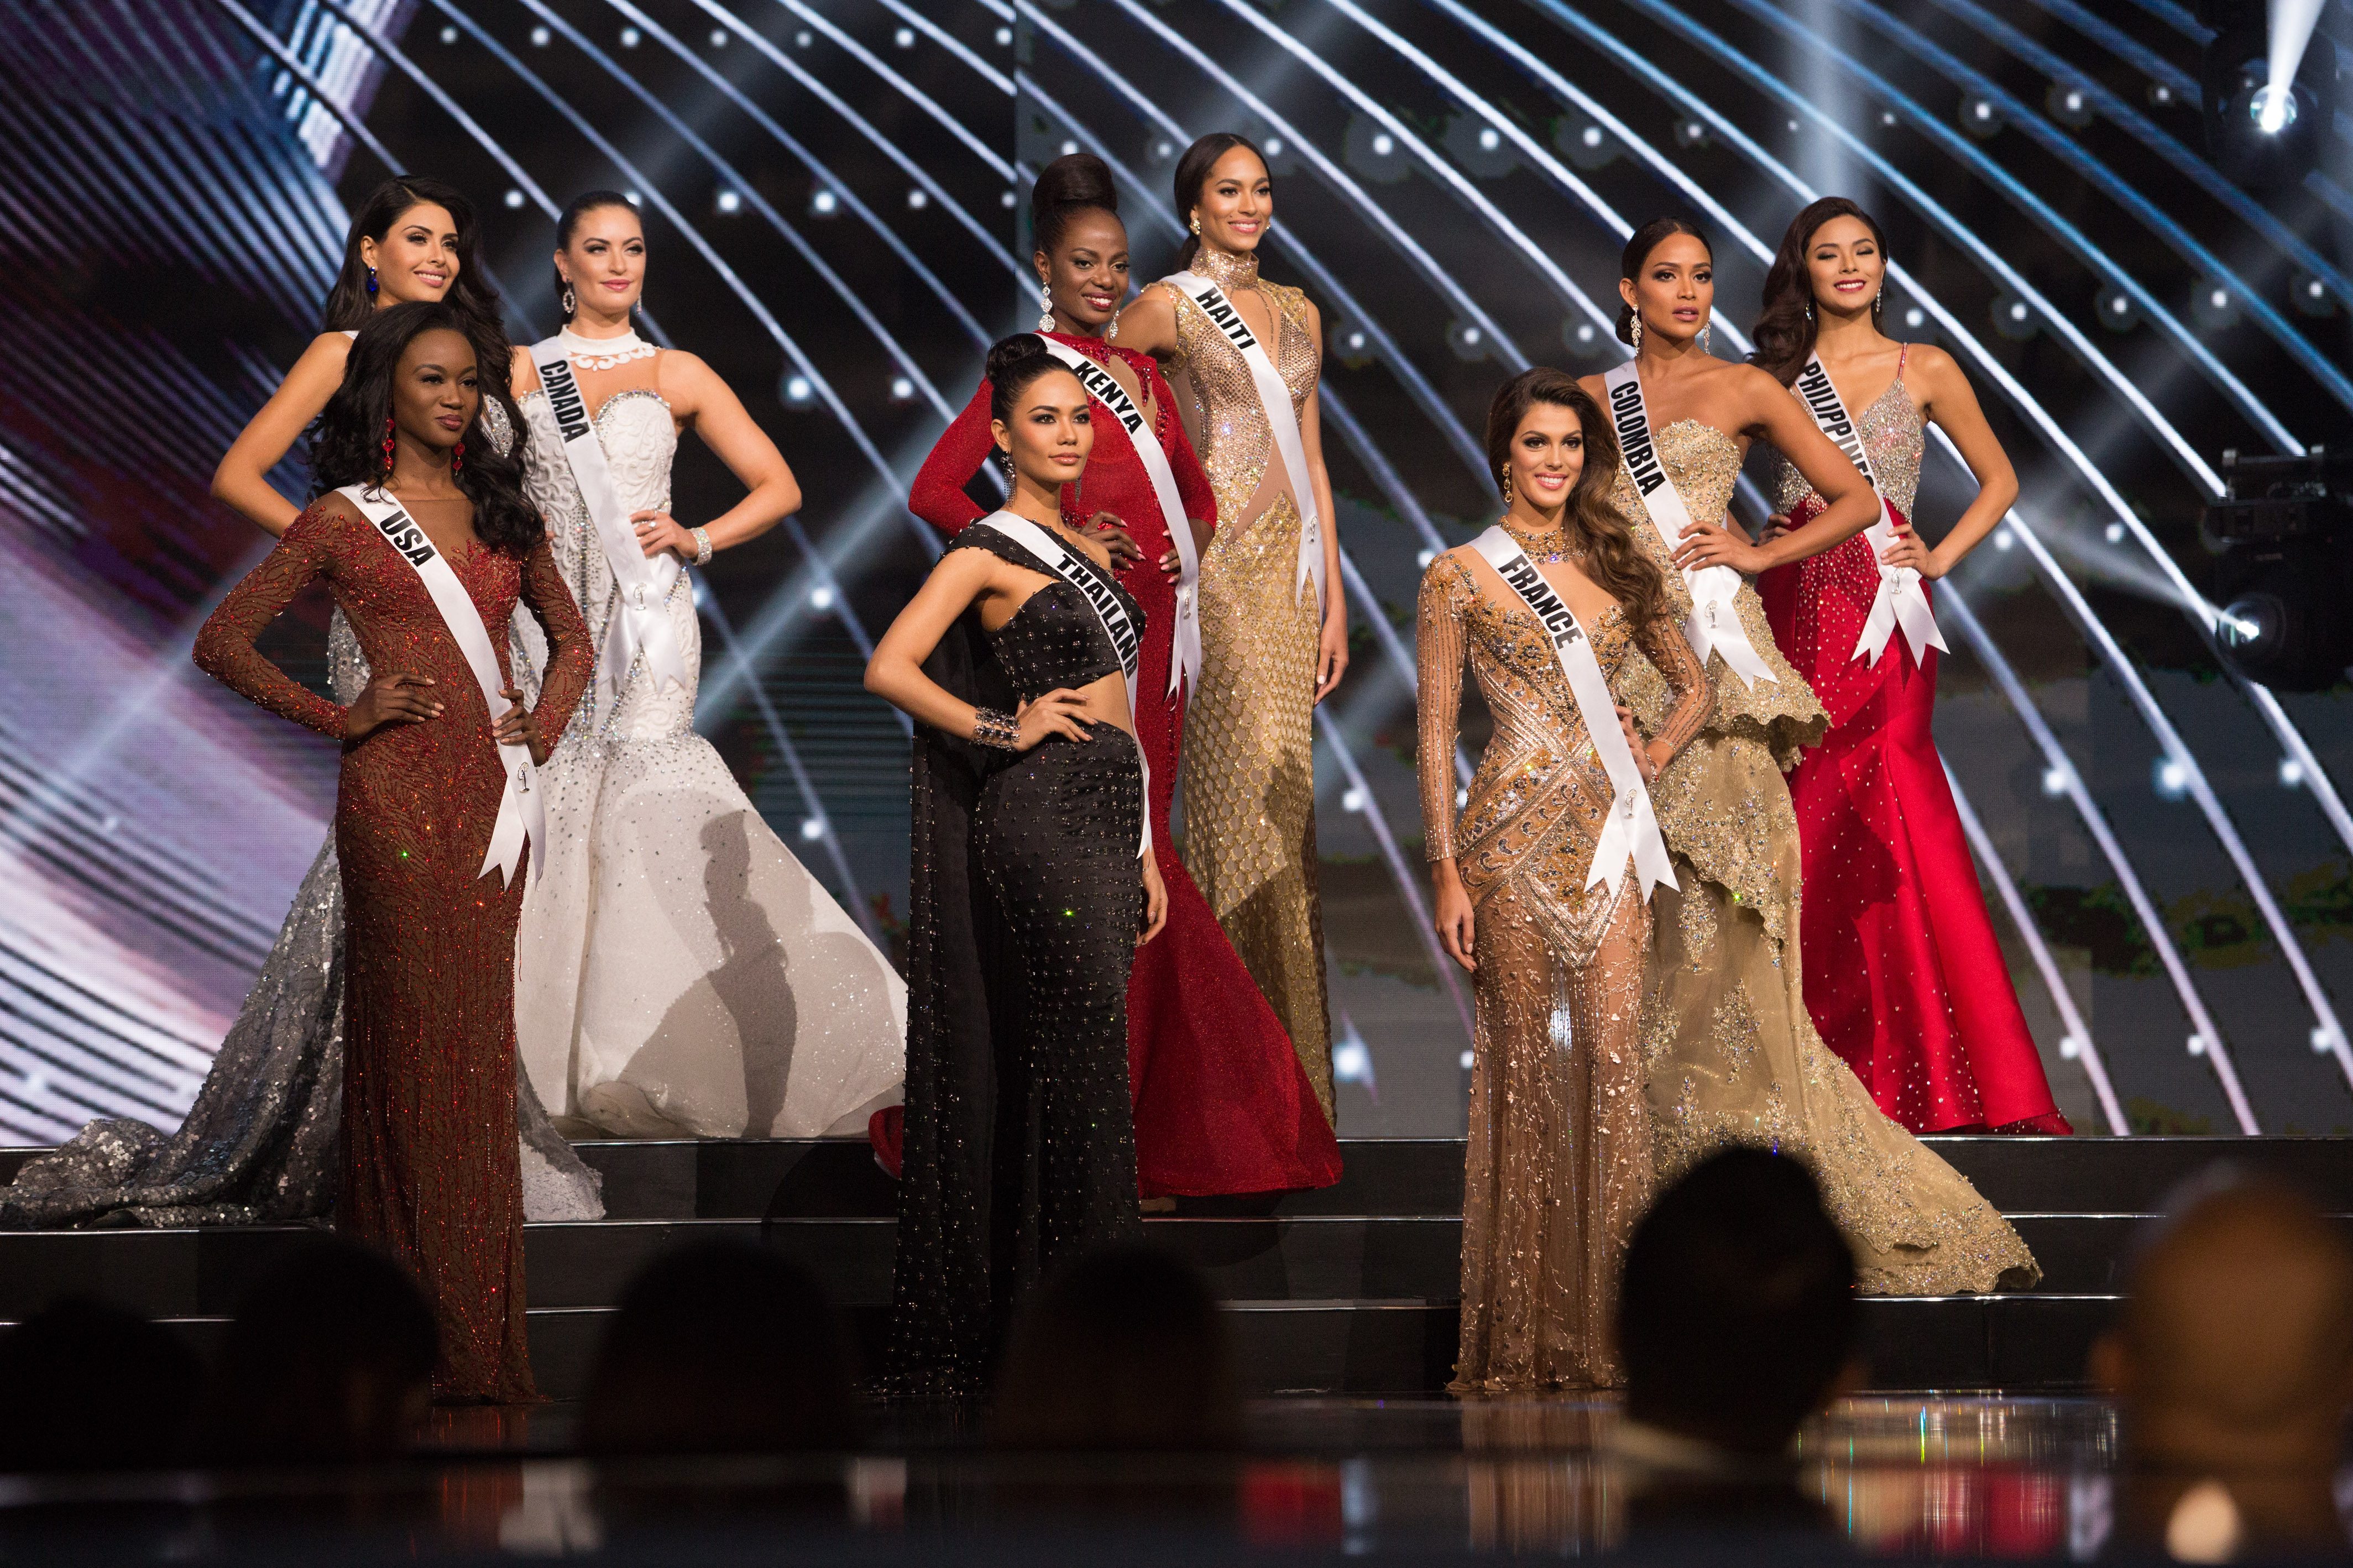 VYING FOR THE CROWN. The Top 9 finalists during the coronation. Photo from HO/The Miss Universe Organization  